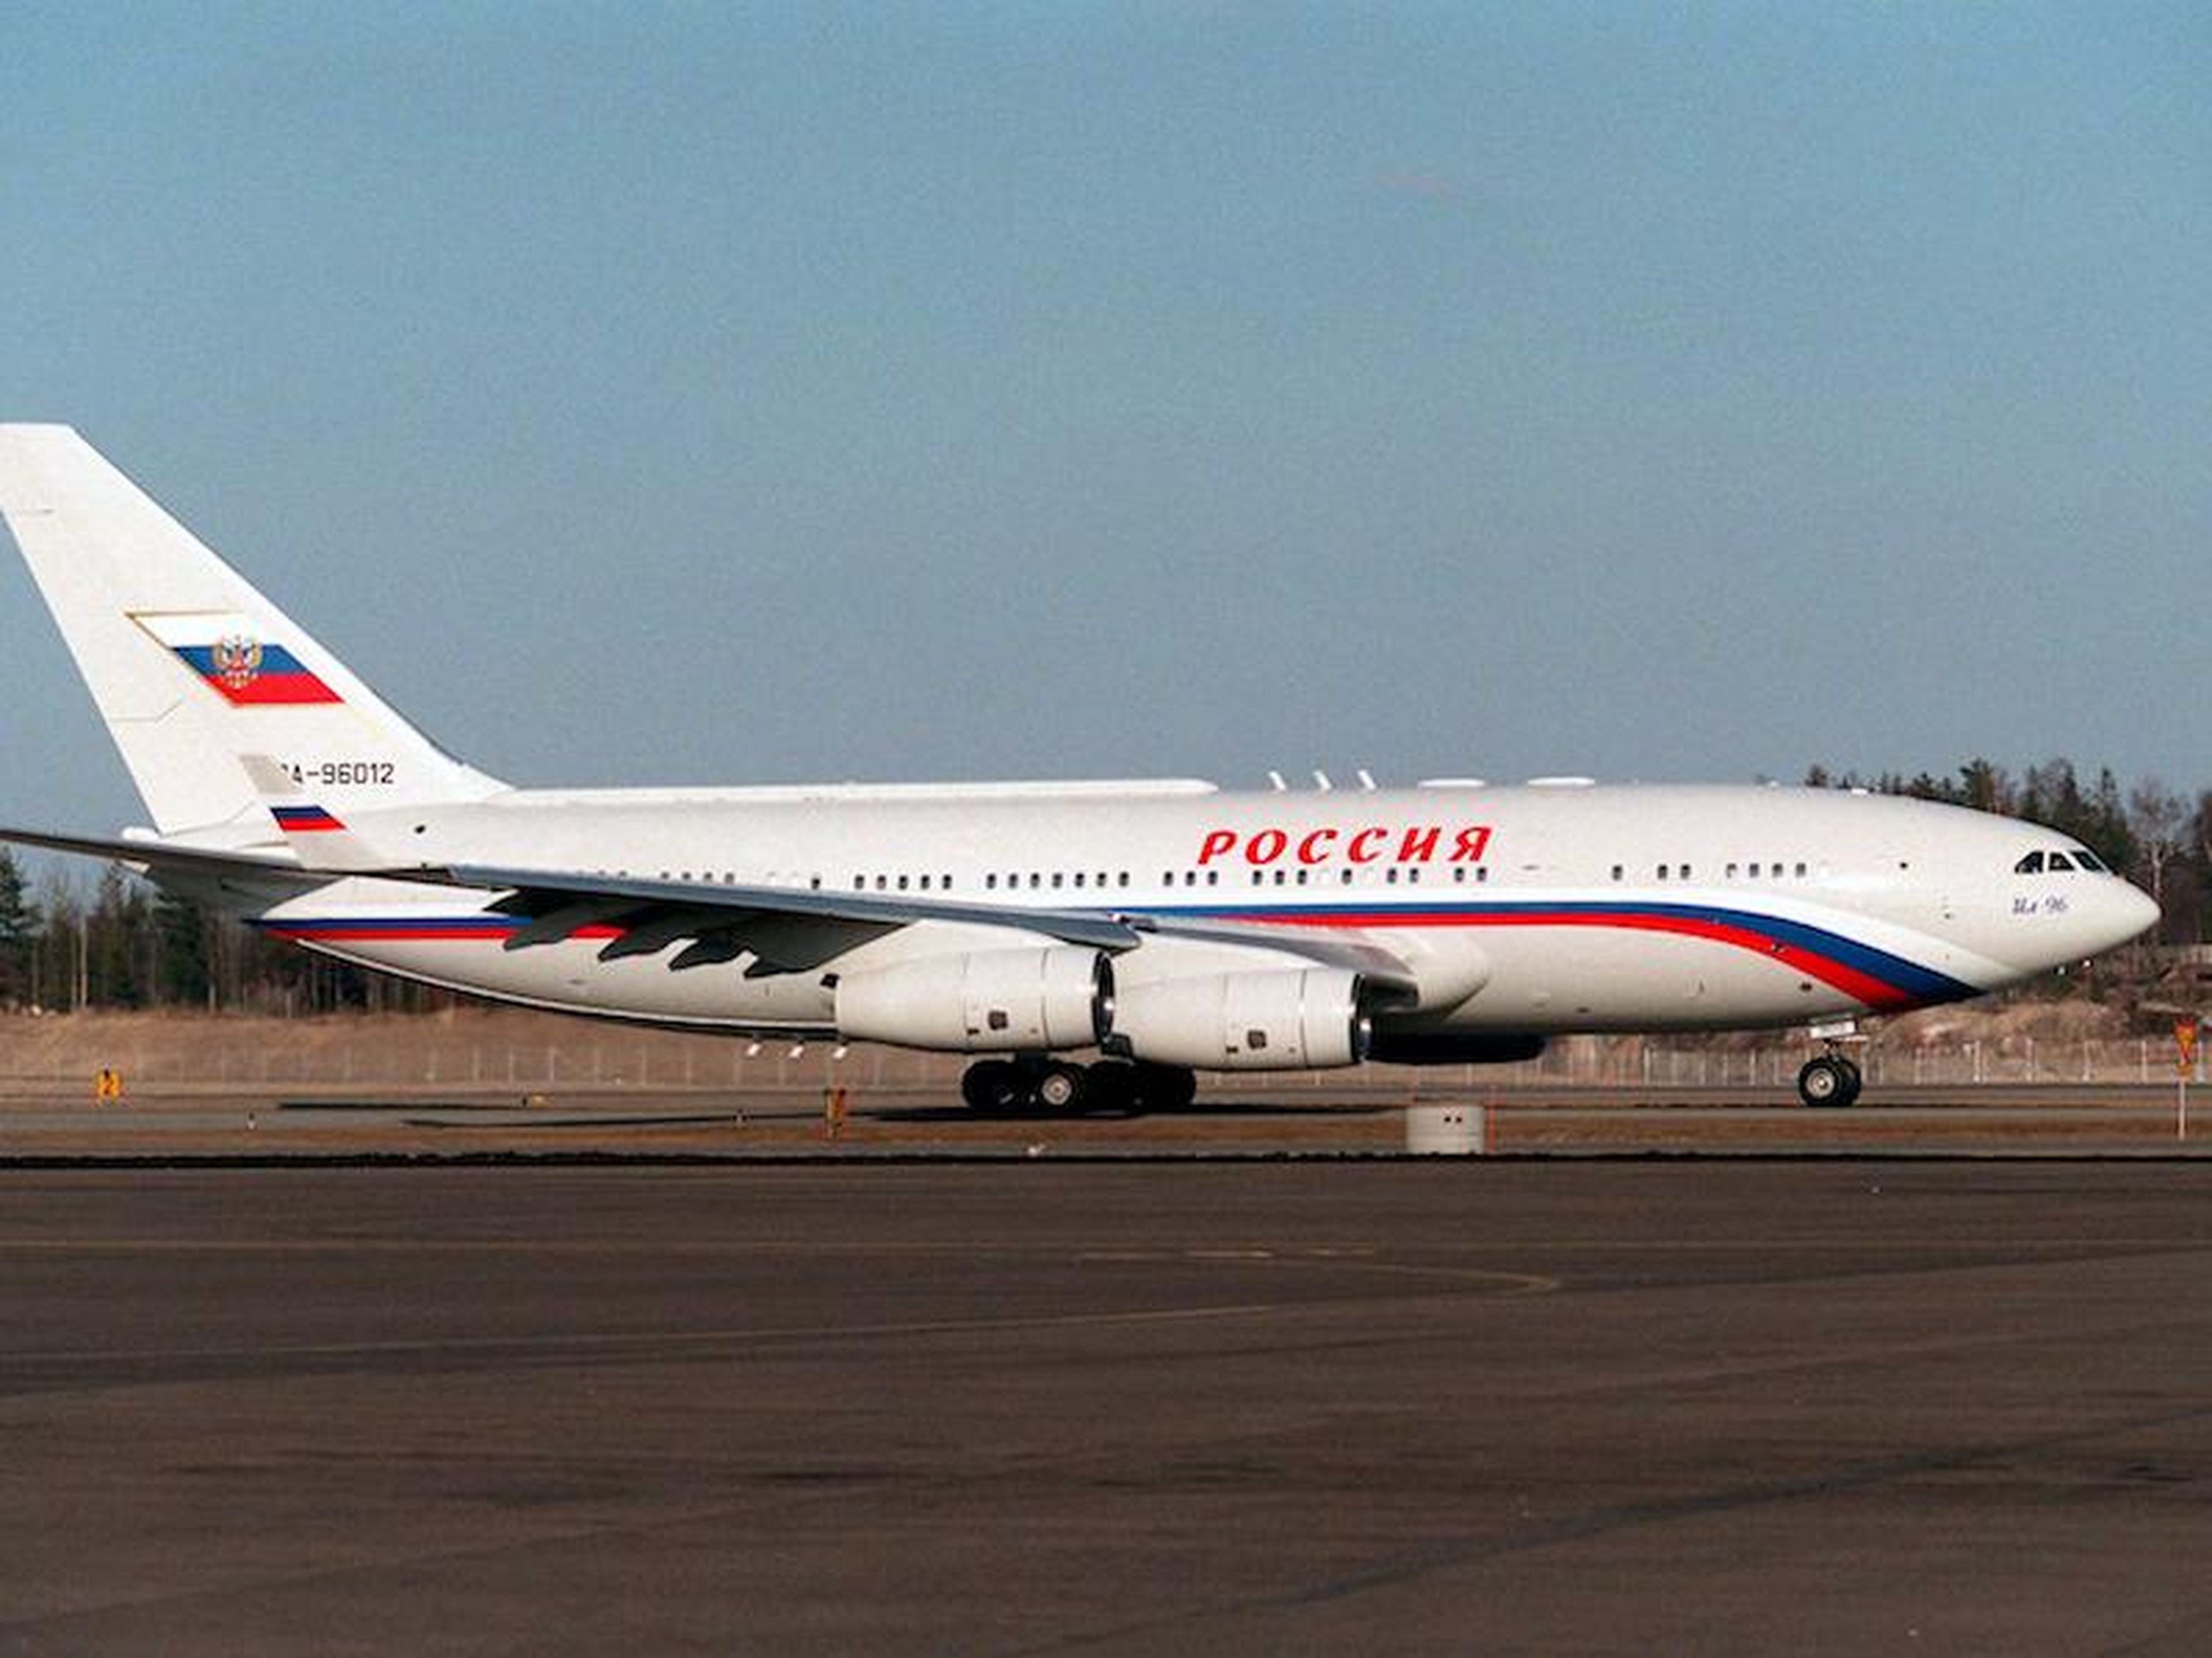 This is not Putin's plane but an example of what his plane would look like.